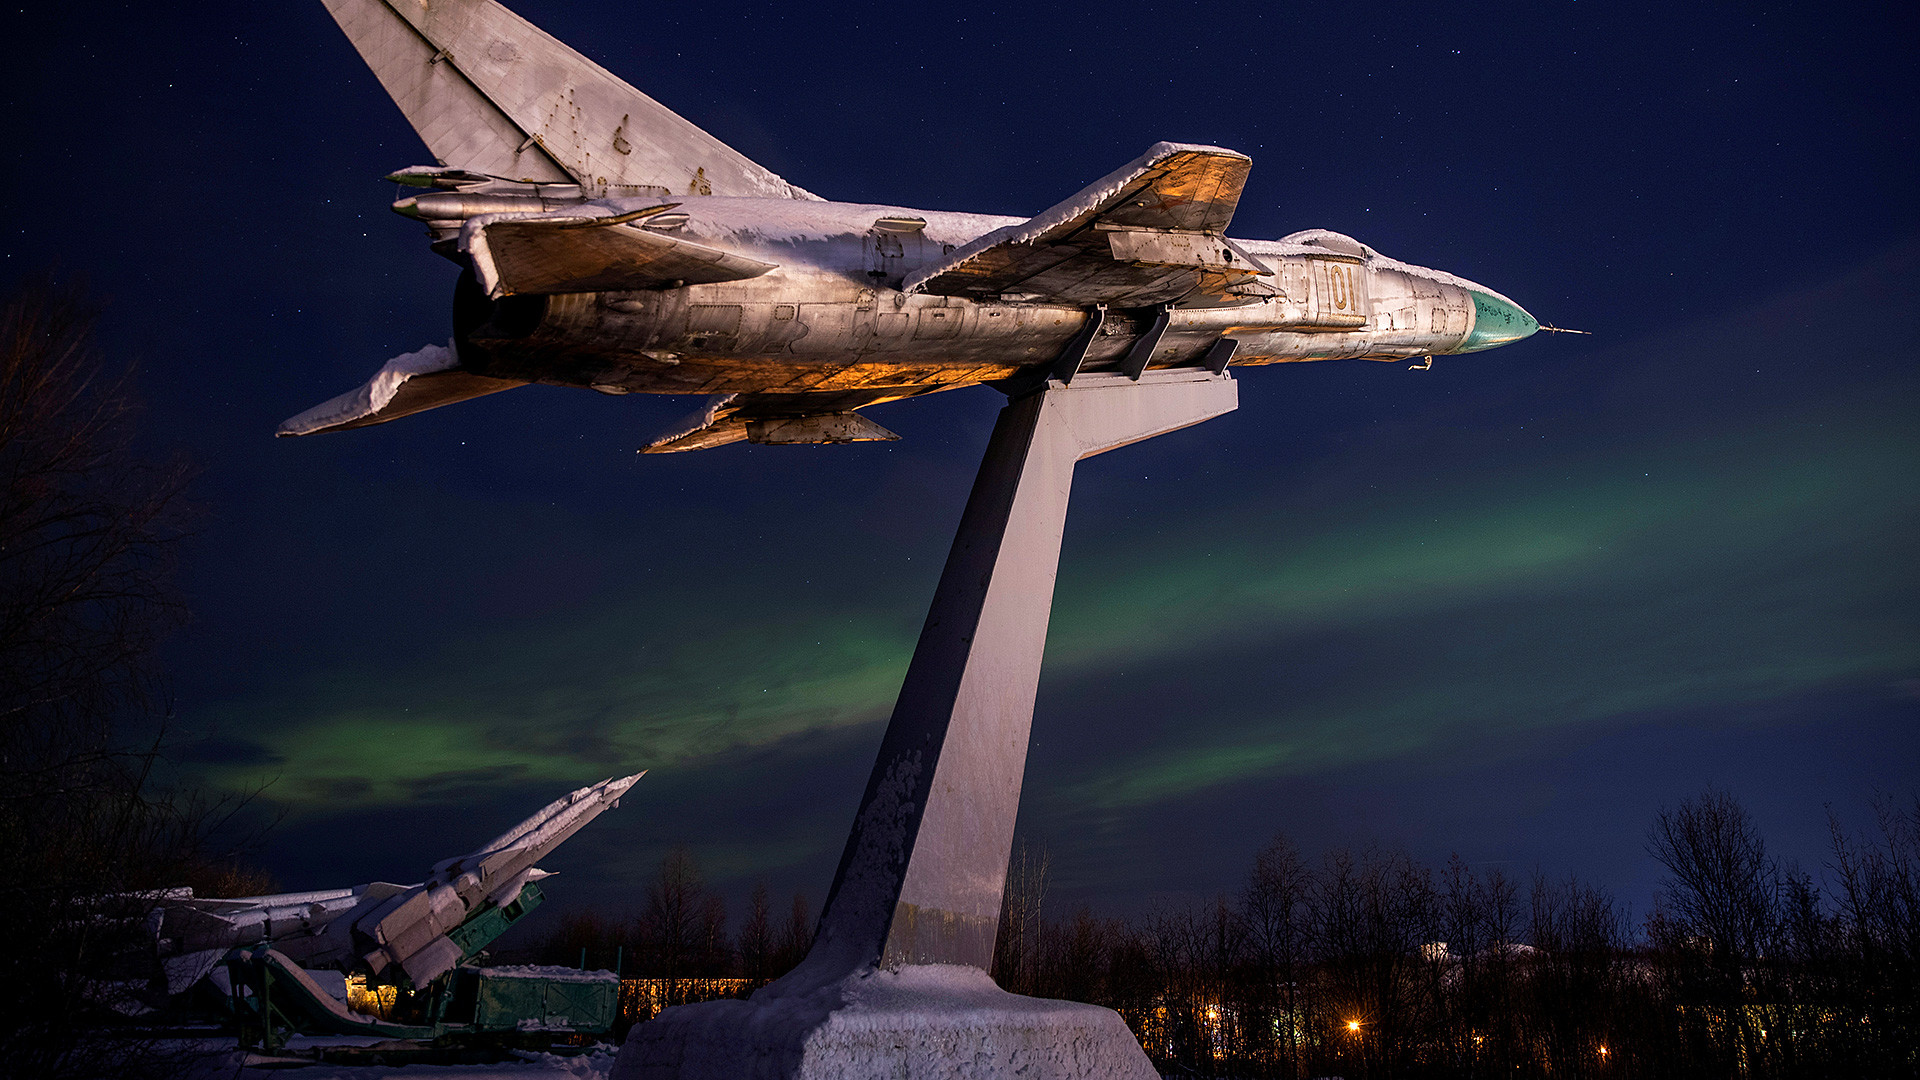 Northern lights over the memorial To Soldiers of the 1st Air Defence Corps to Abram Mys, outside Murmansk, late October 2019.